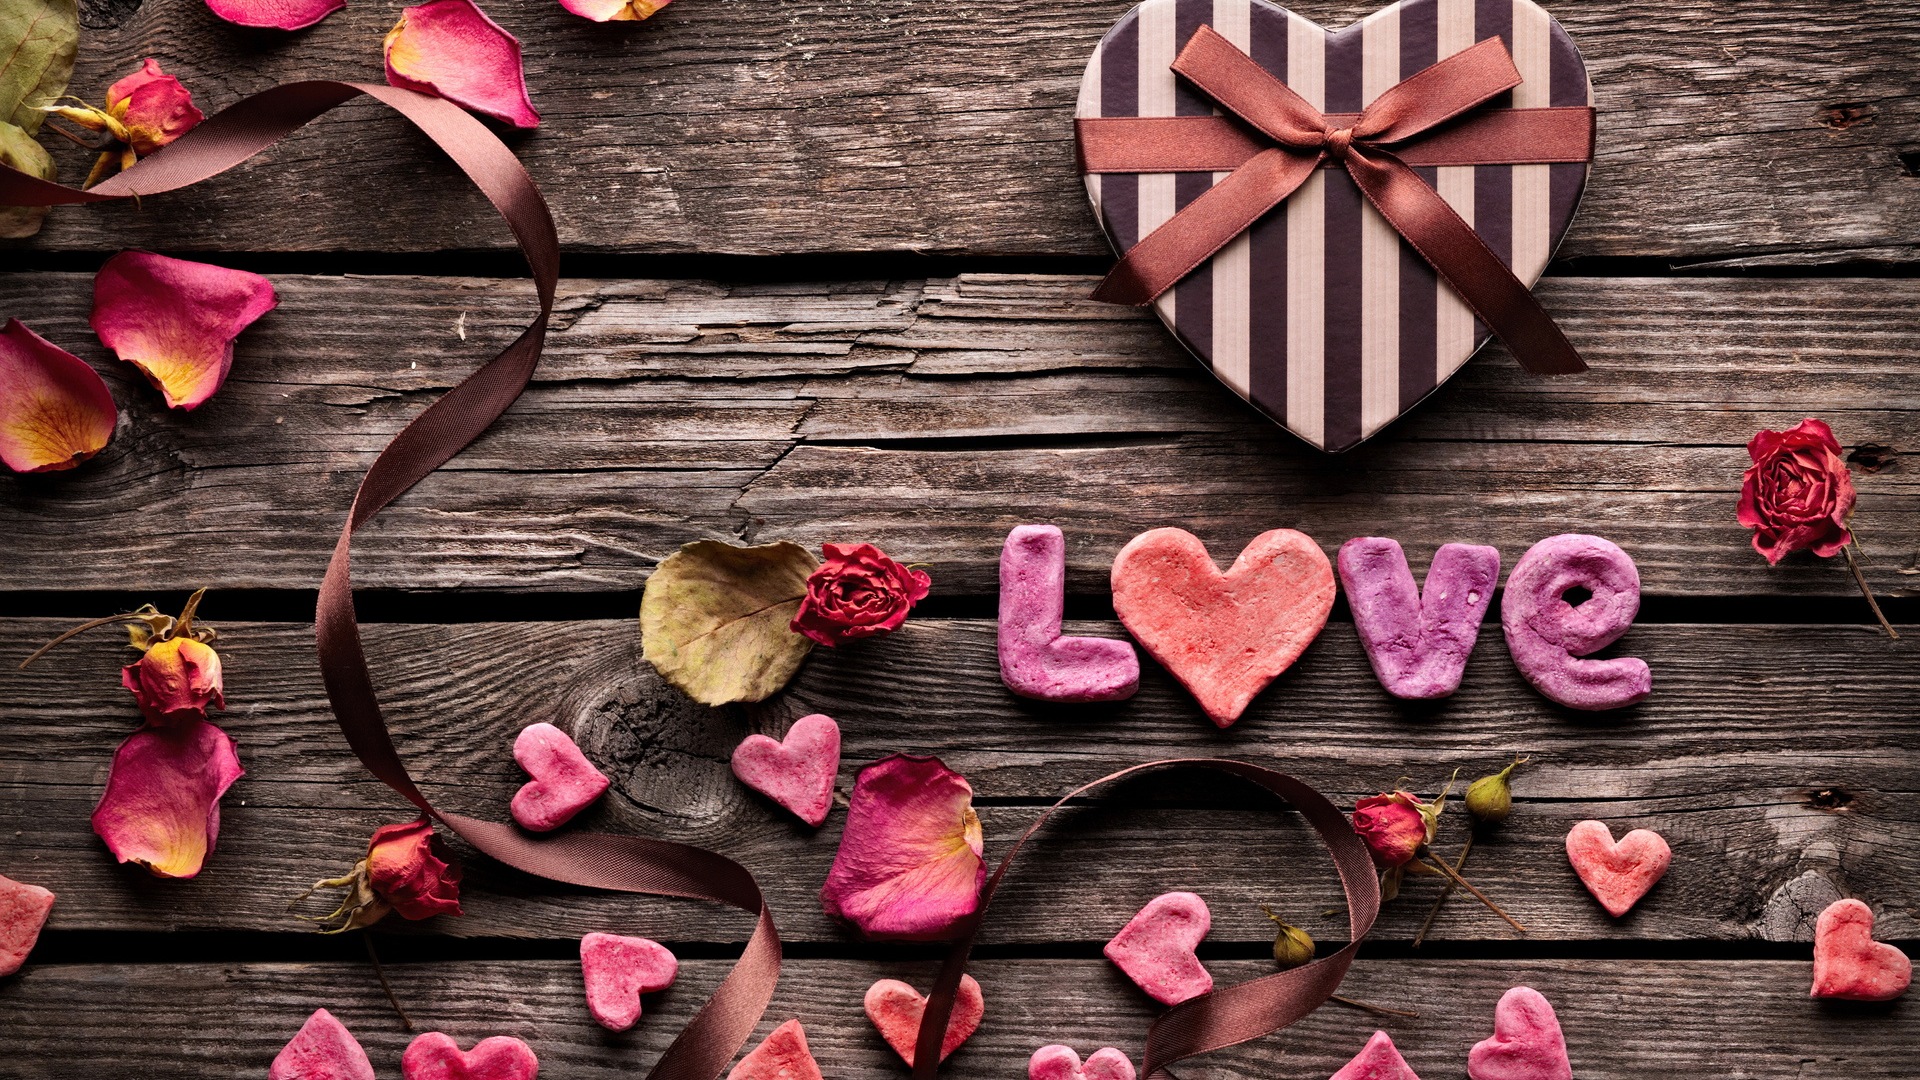 Warm and romantic Valentine's Day HD wallpapers #16 - 1920x1080